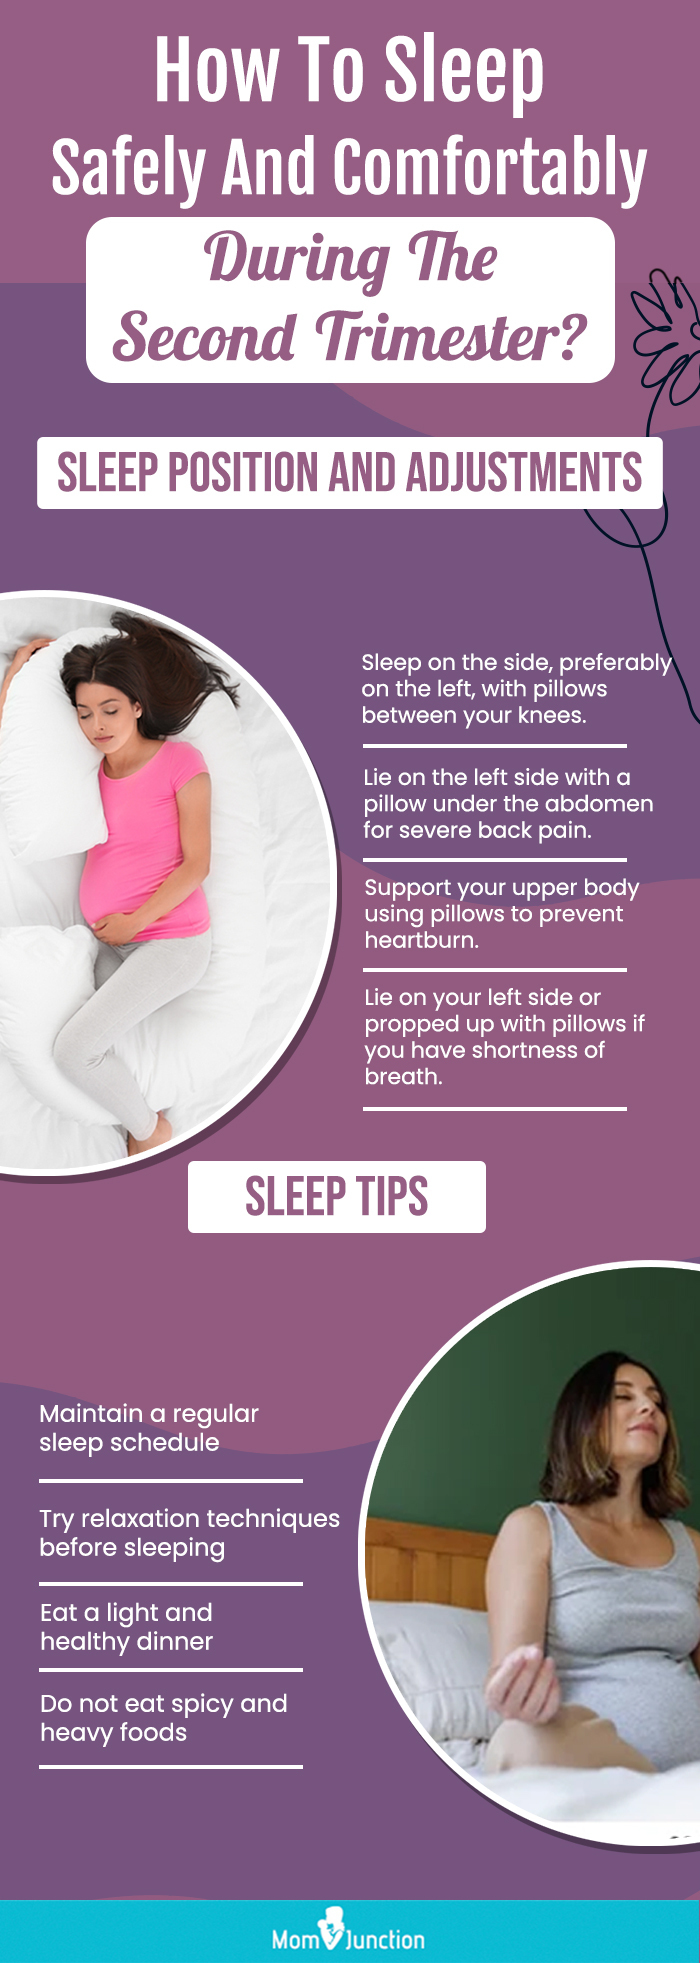 how to sleep safely and comfortably during the second trimester (infographic)